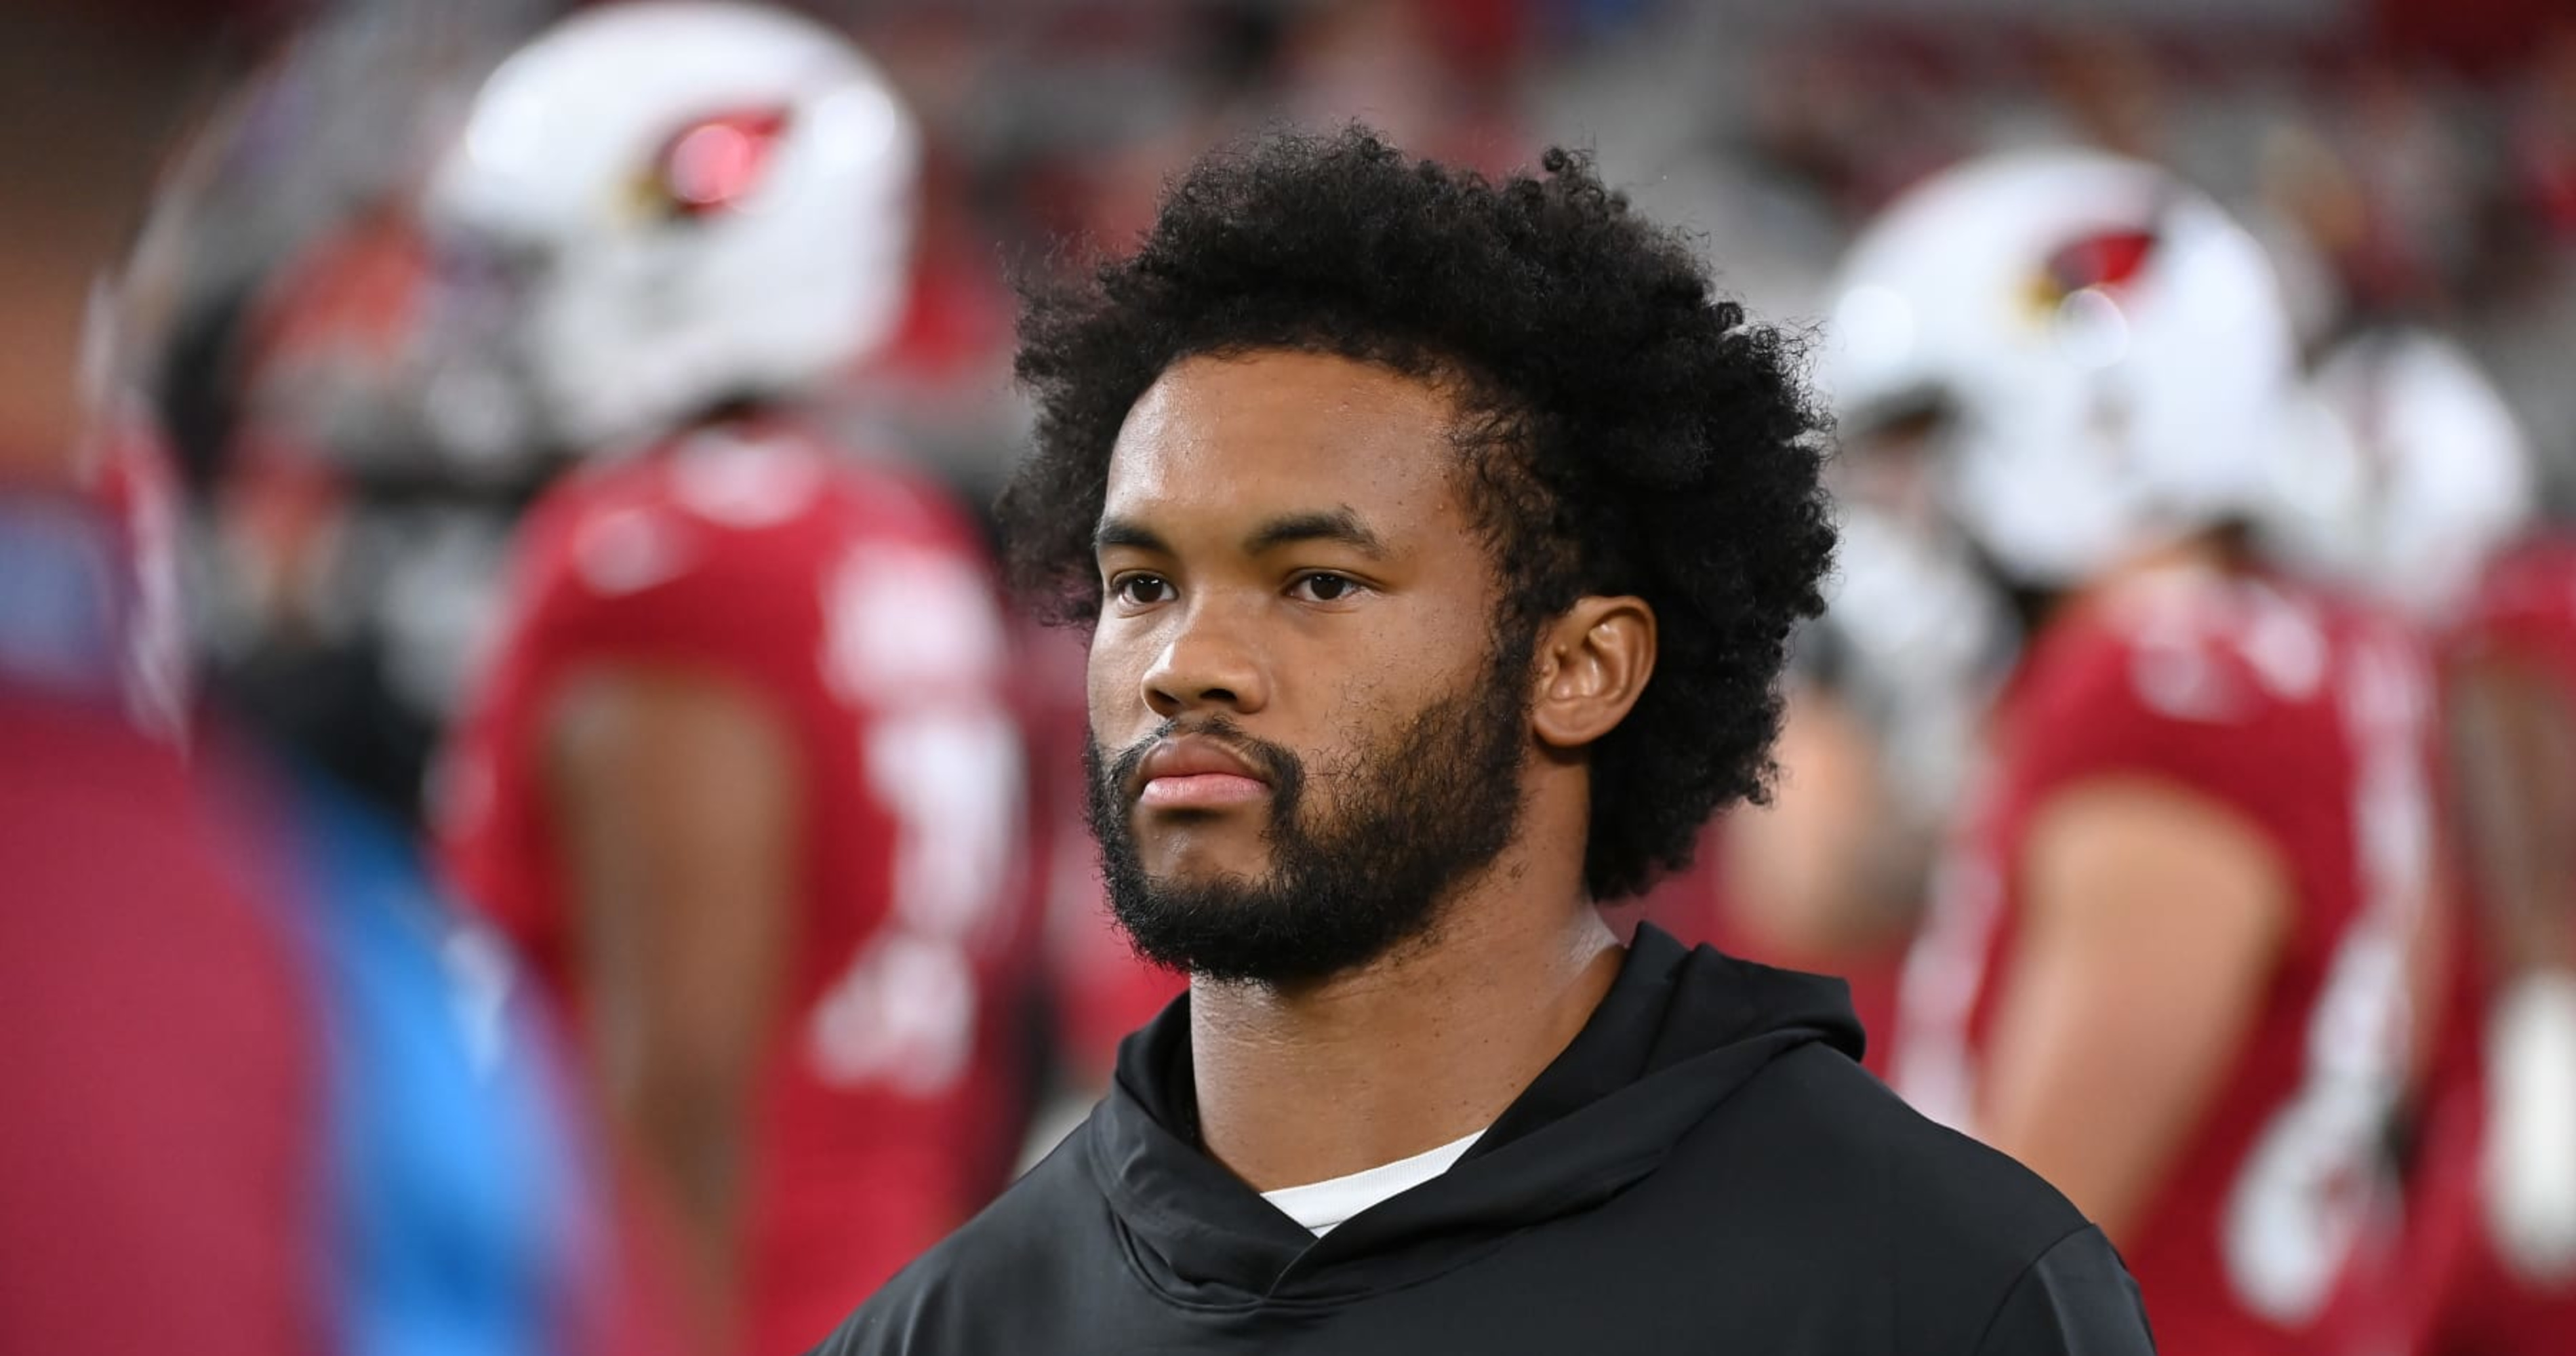 Cardinals QB Kyler Murray out for season with torn ACL